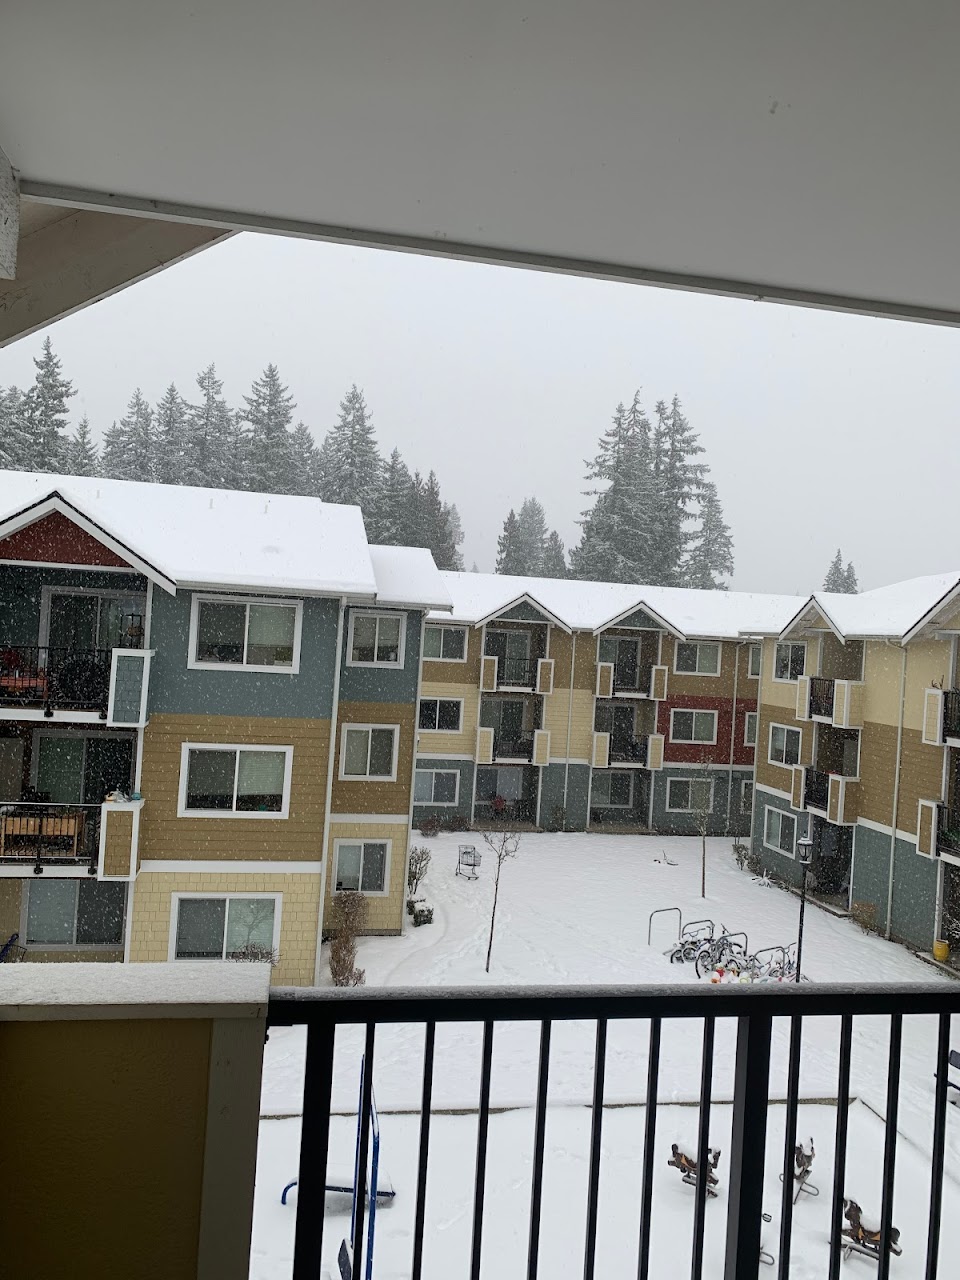 Photo of QUILCEDA CREEK APARTMENTS at 12115 STATE AVE. MARYSVILLE, WA 98271